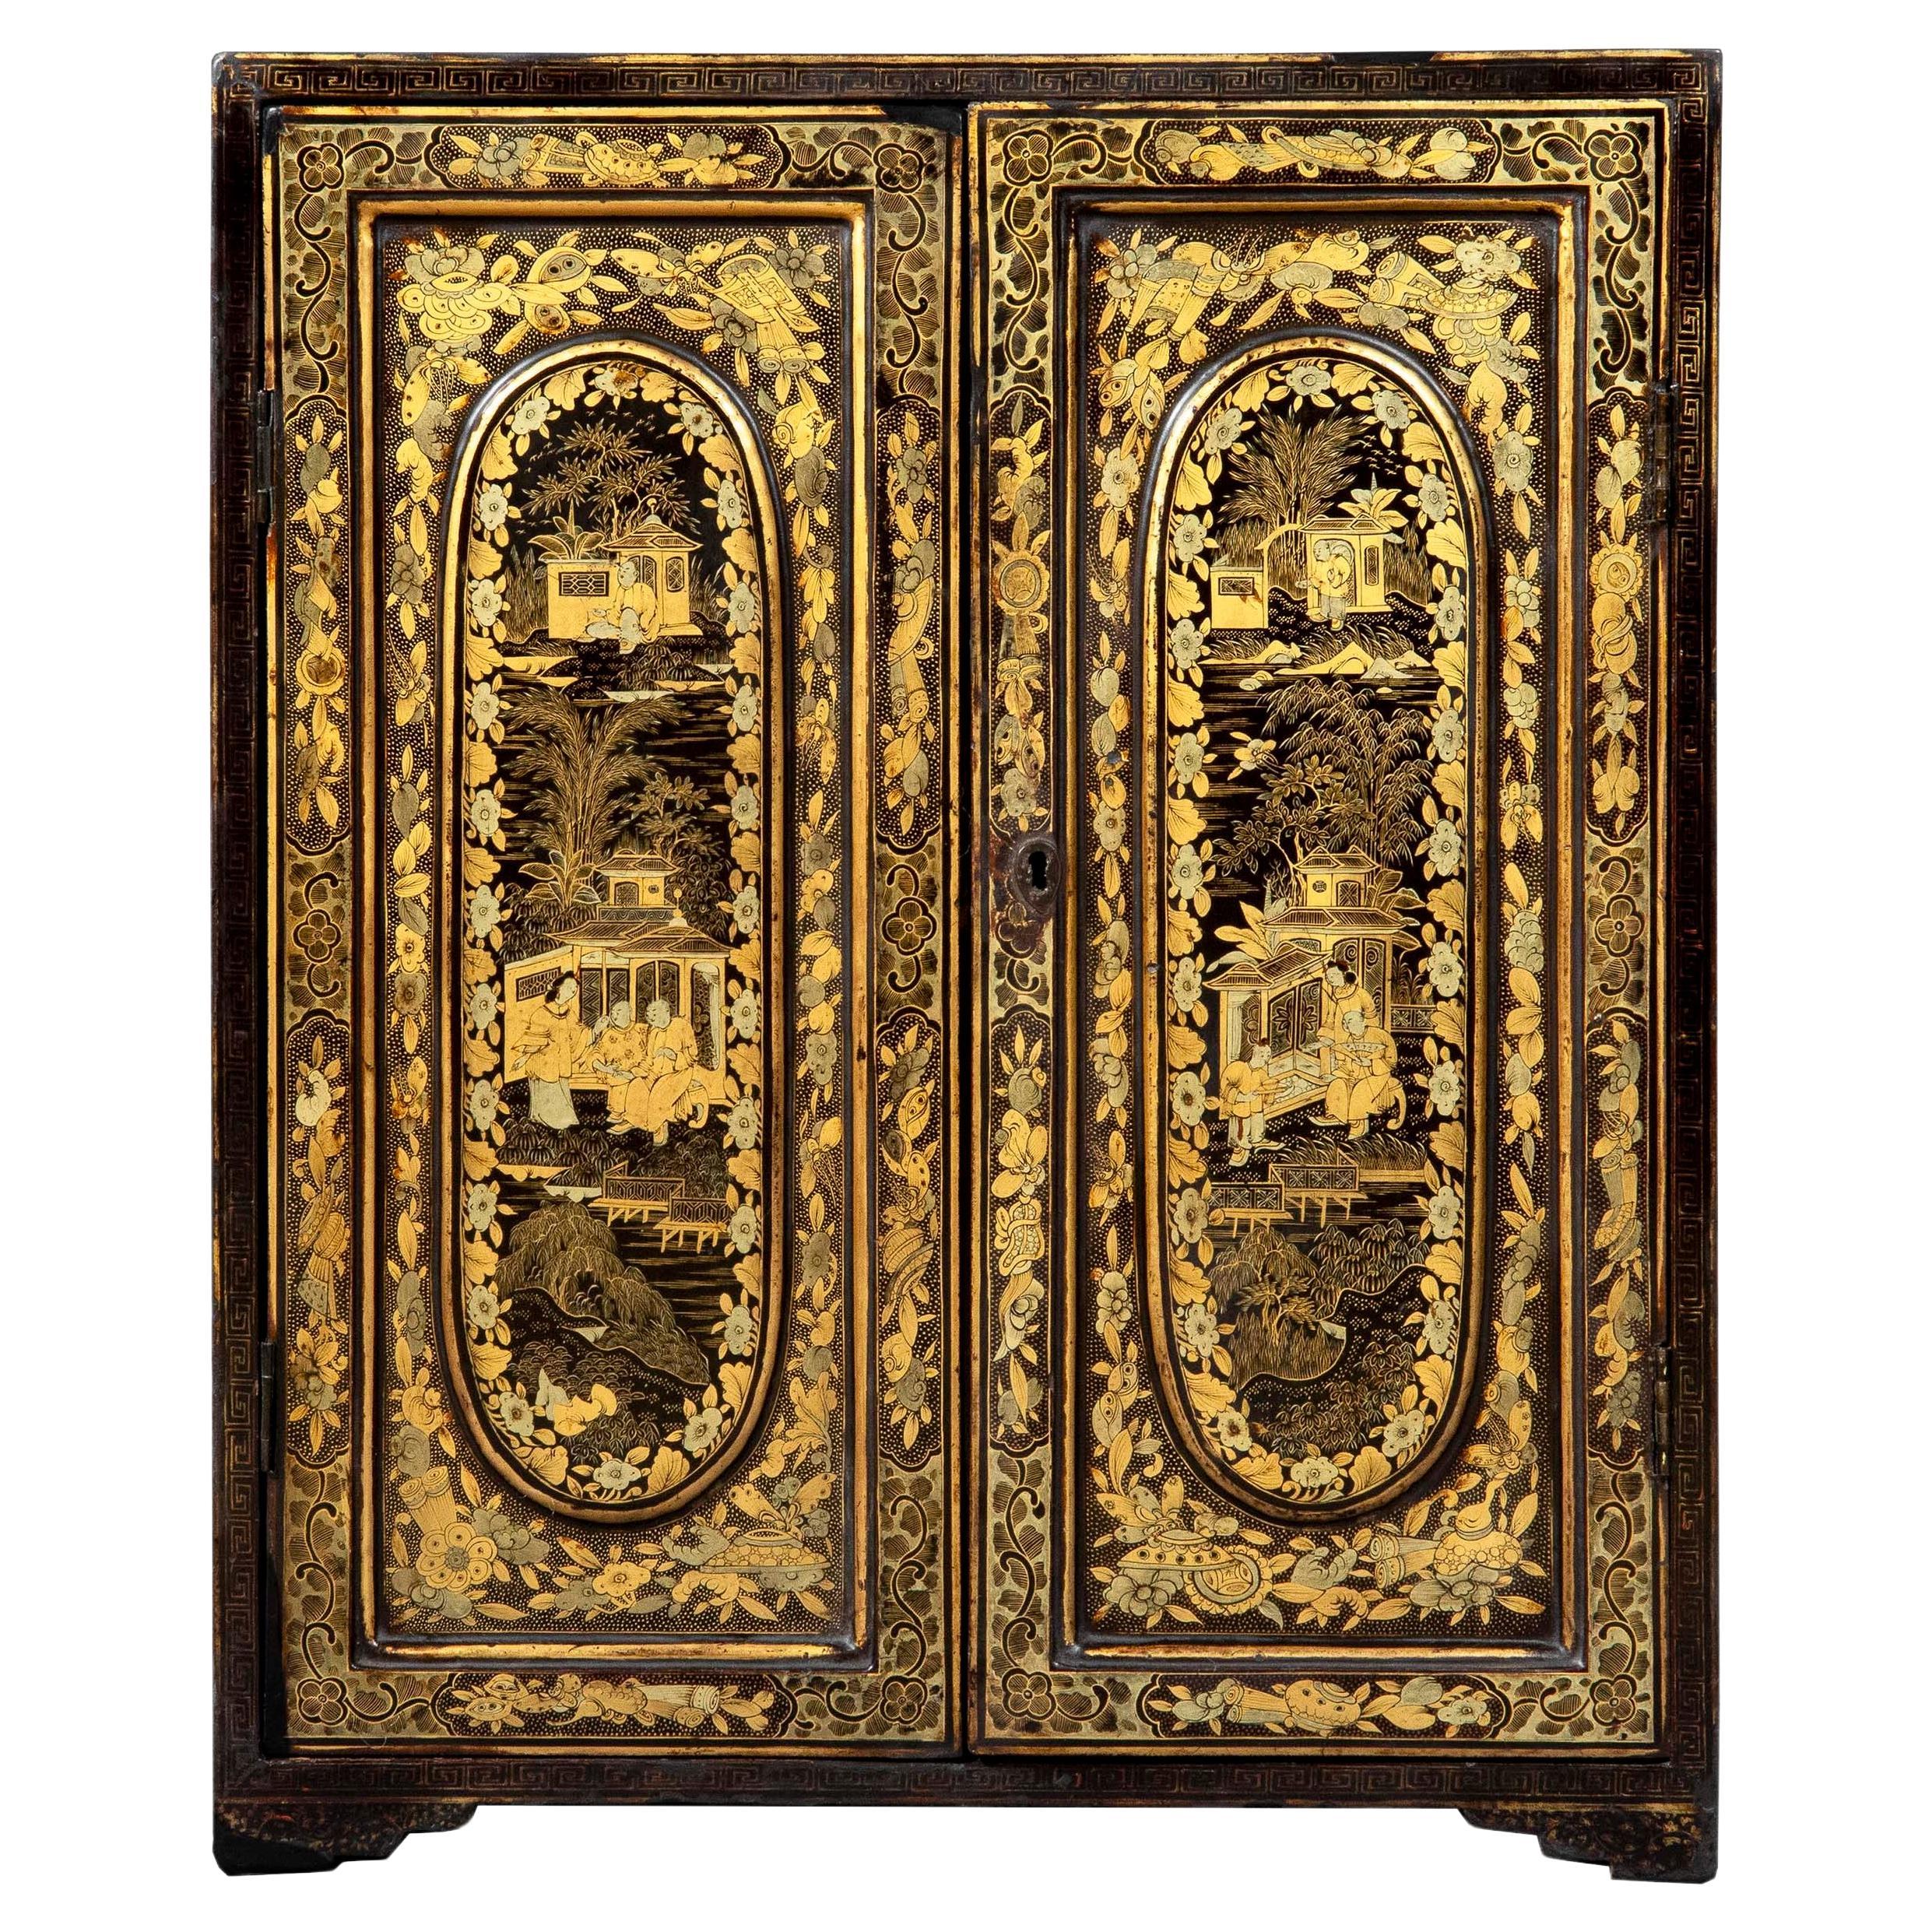 19th Century Chinoiserie Cabinet in Black Lacquer and Gilt Decoration